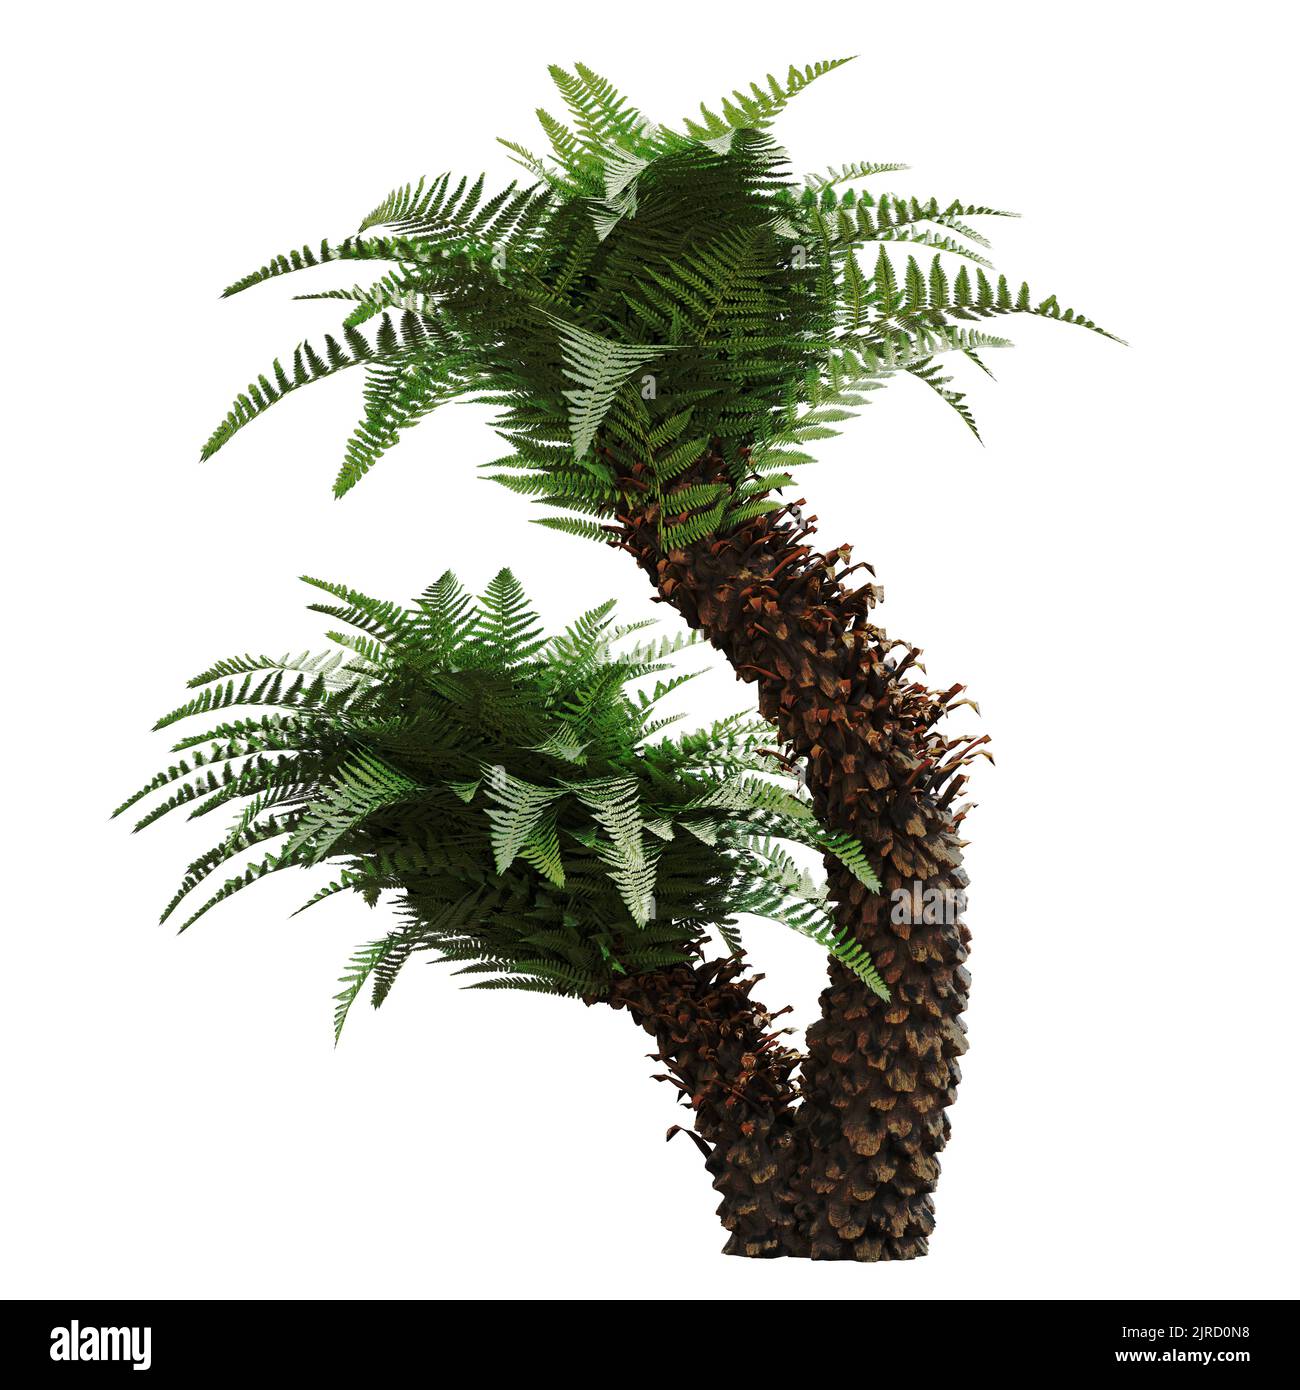 tree fern, exotic tropical plant isolated on white background Stock Photo